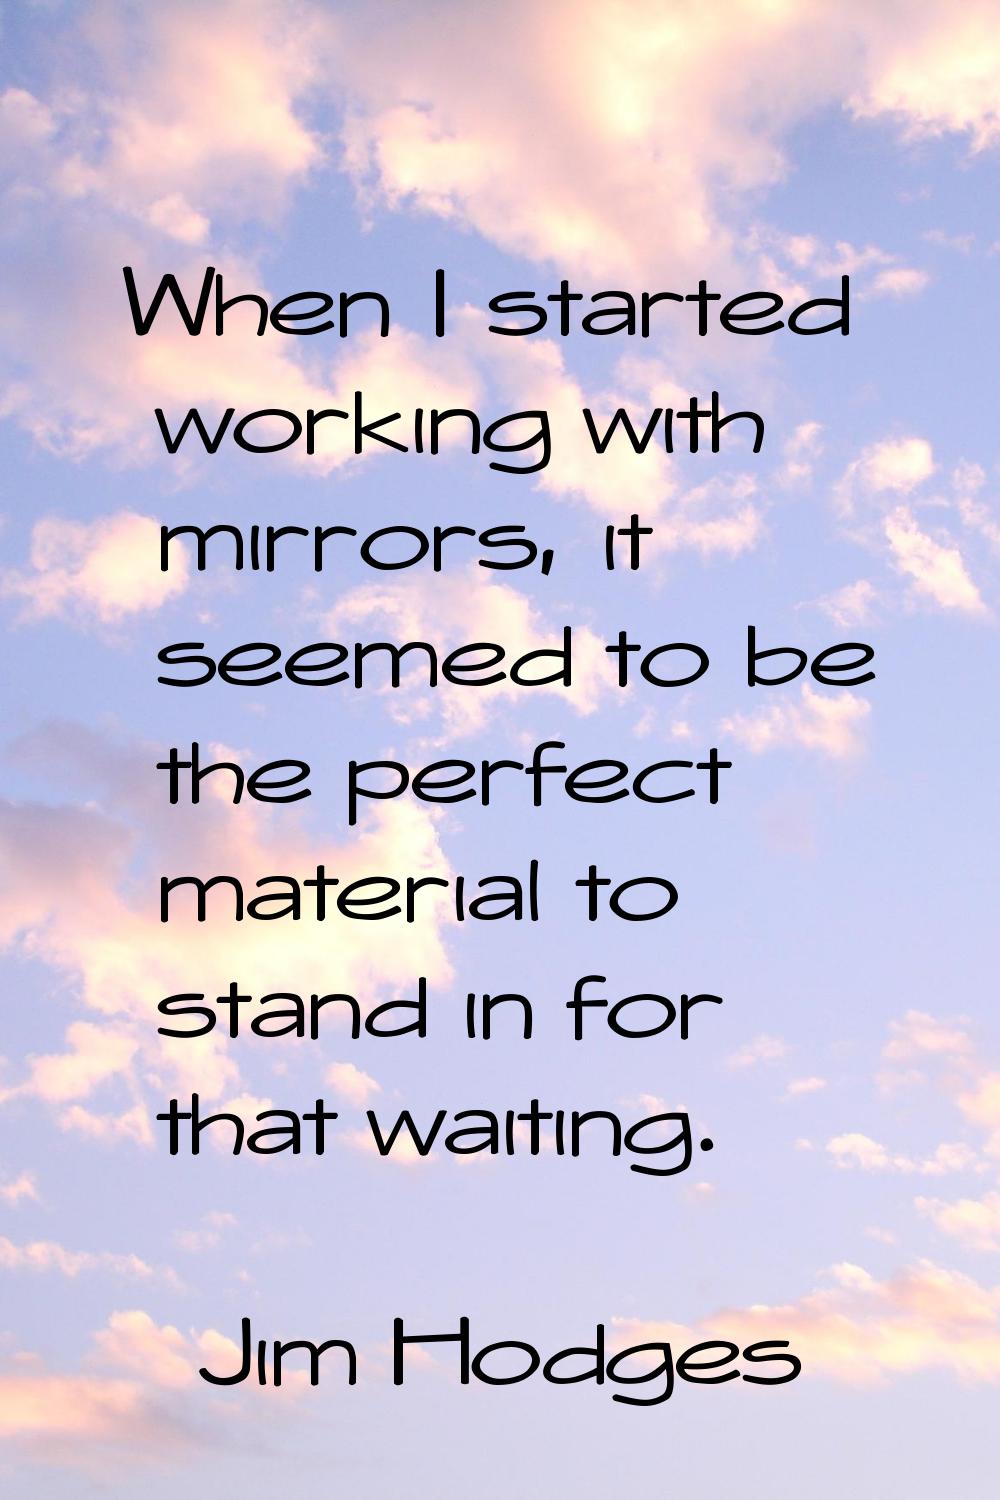 When I started working with mirrors, it seemed to be the perfect material to stand in for that wait